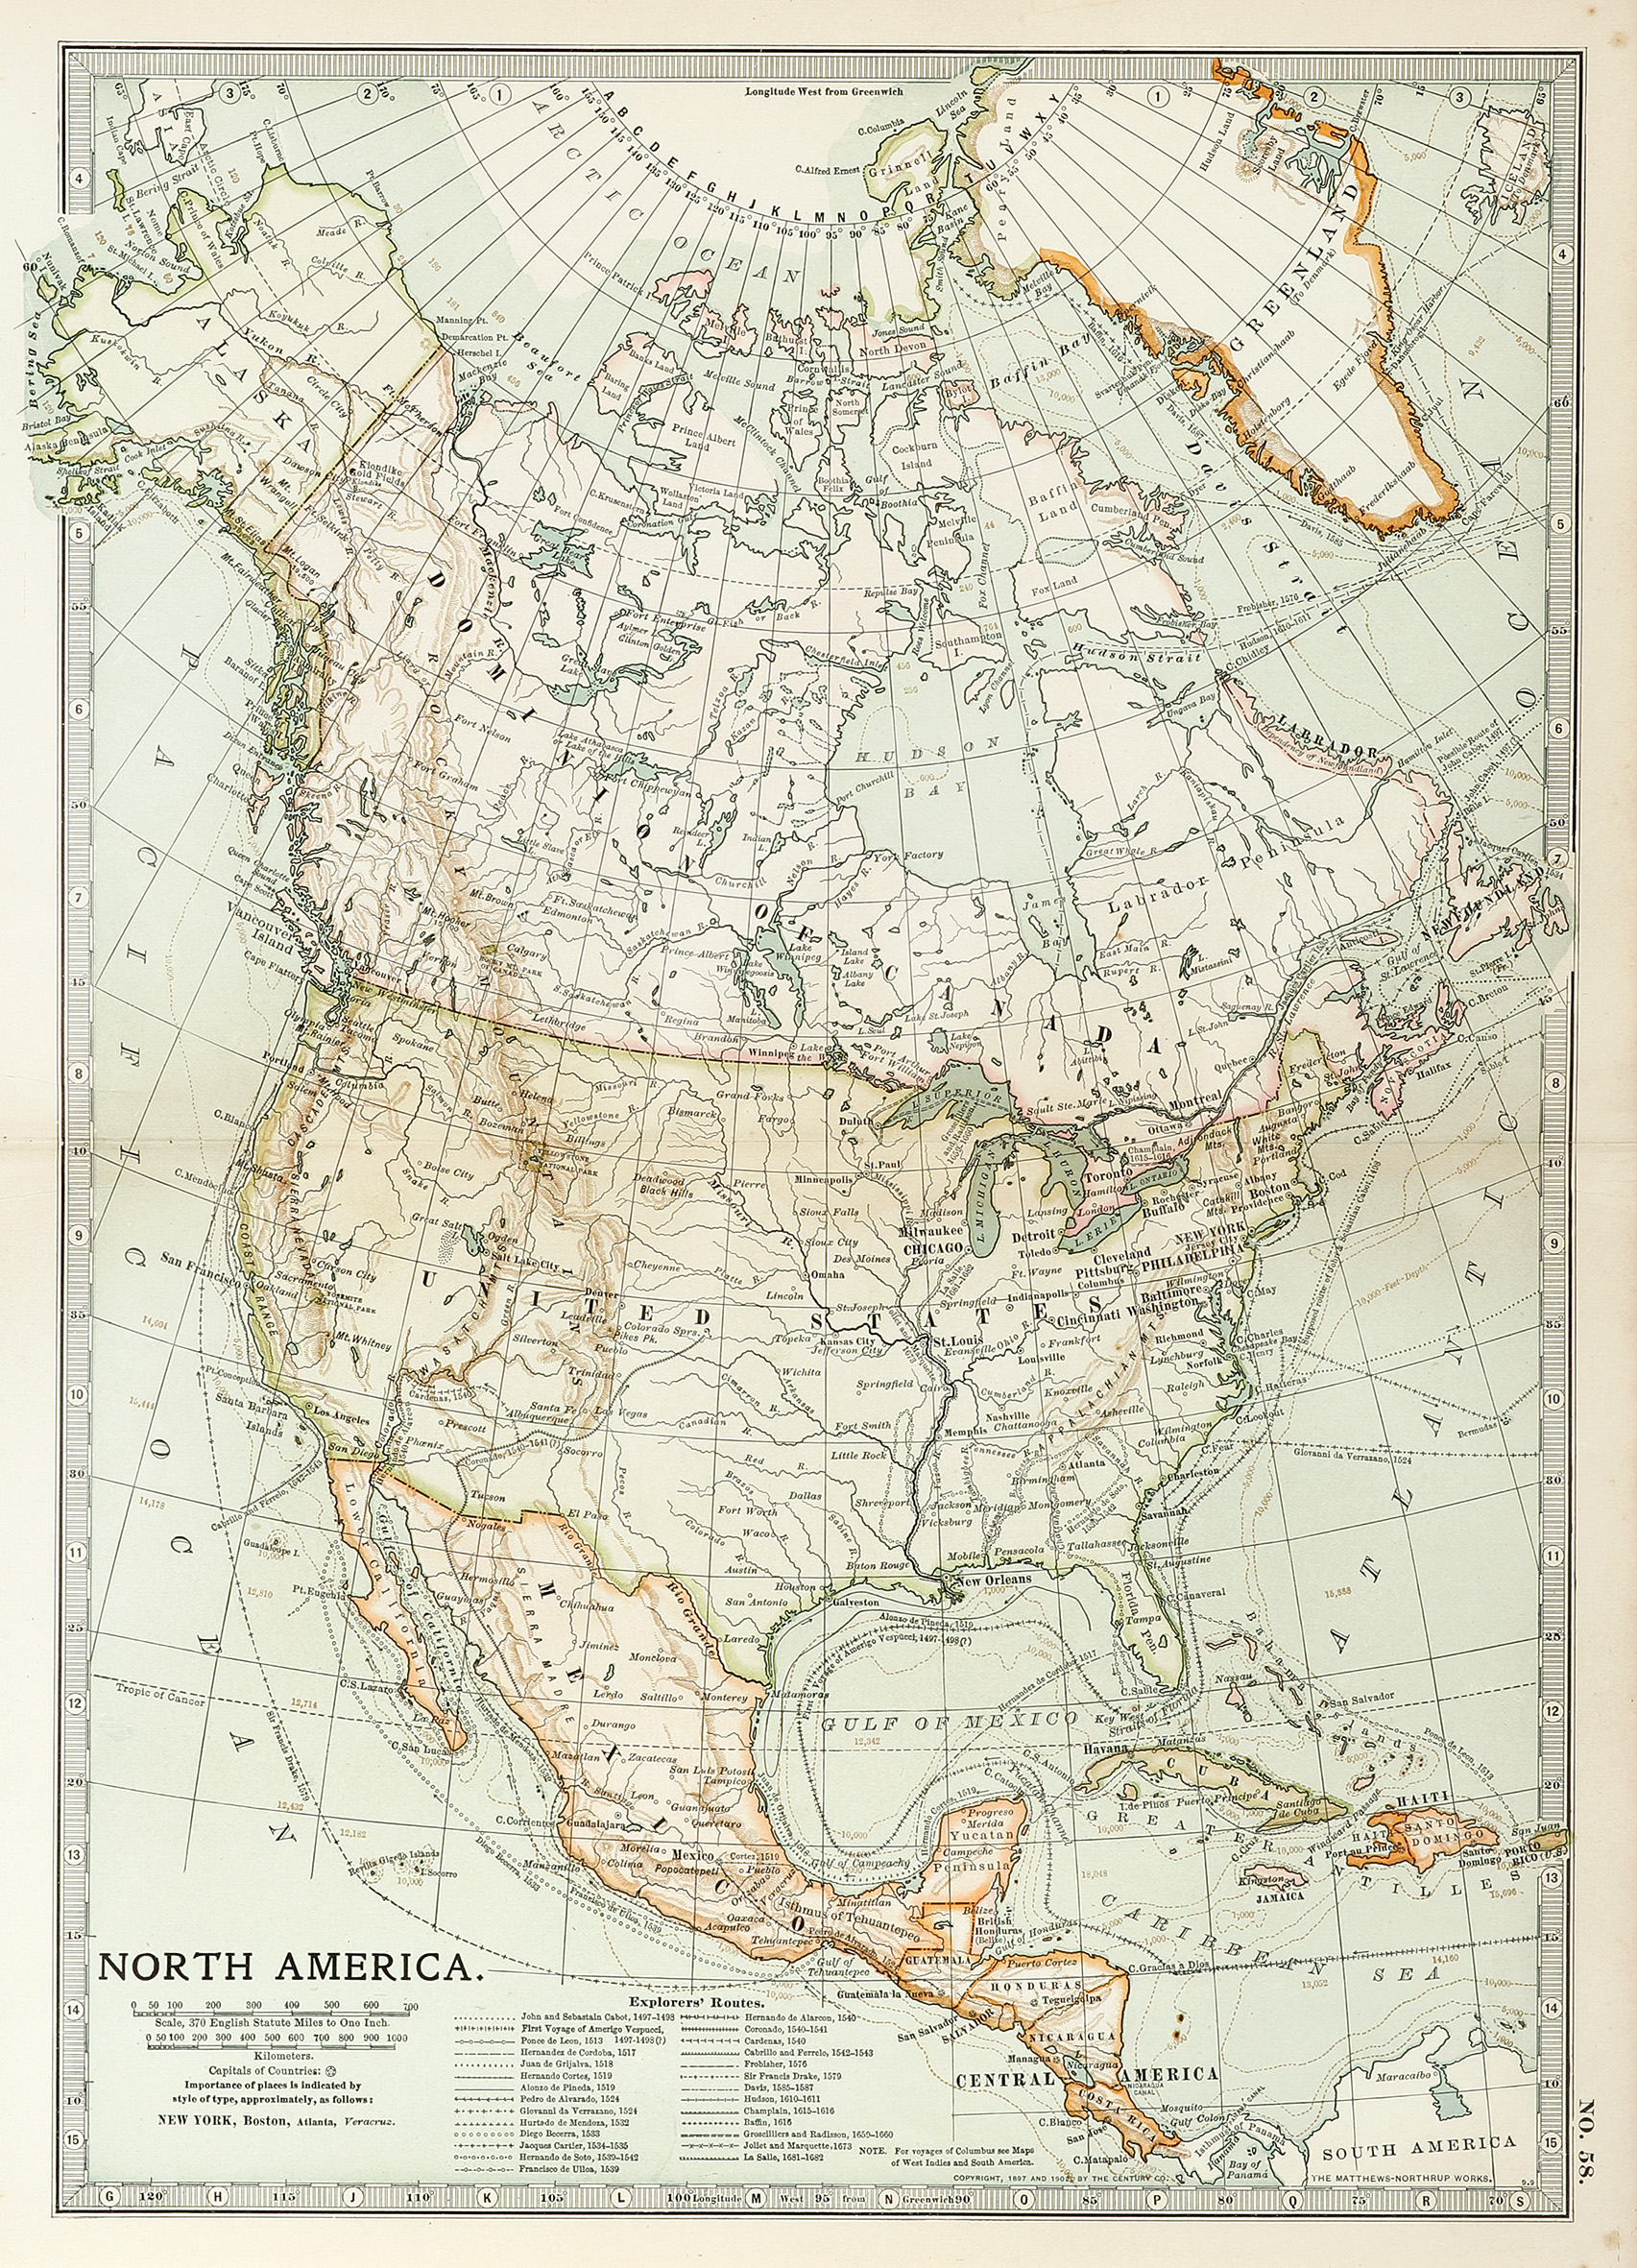 North America. - Antique Print from 1903